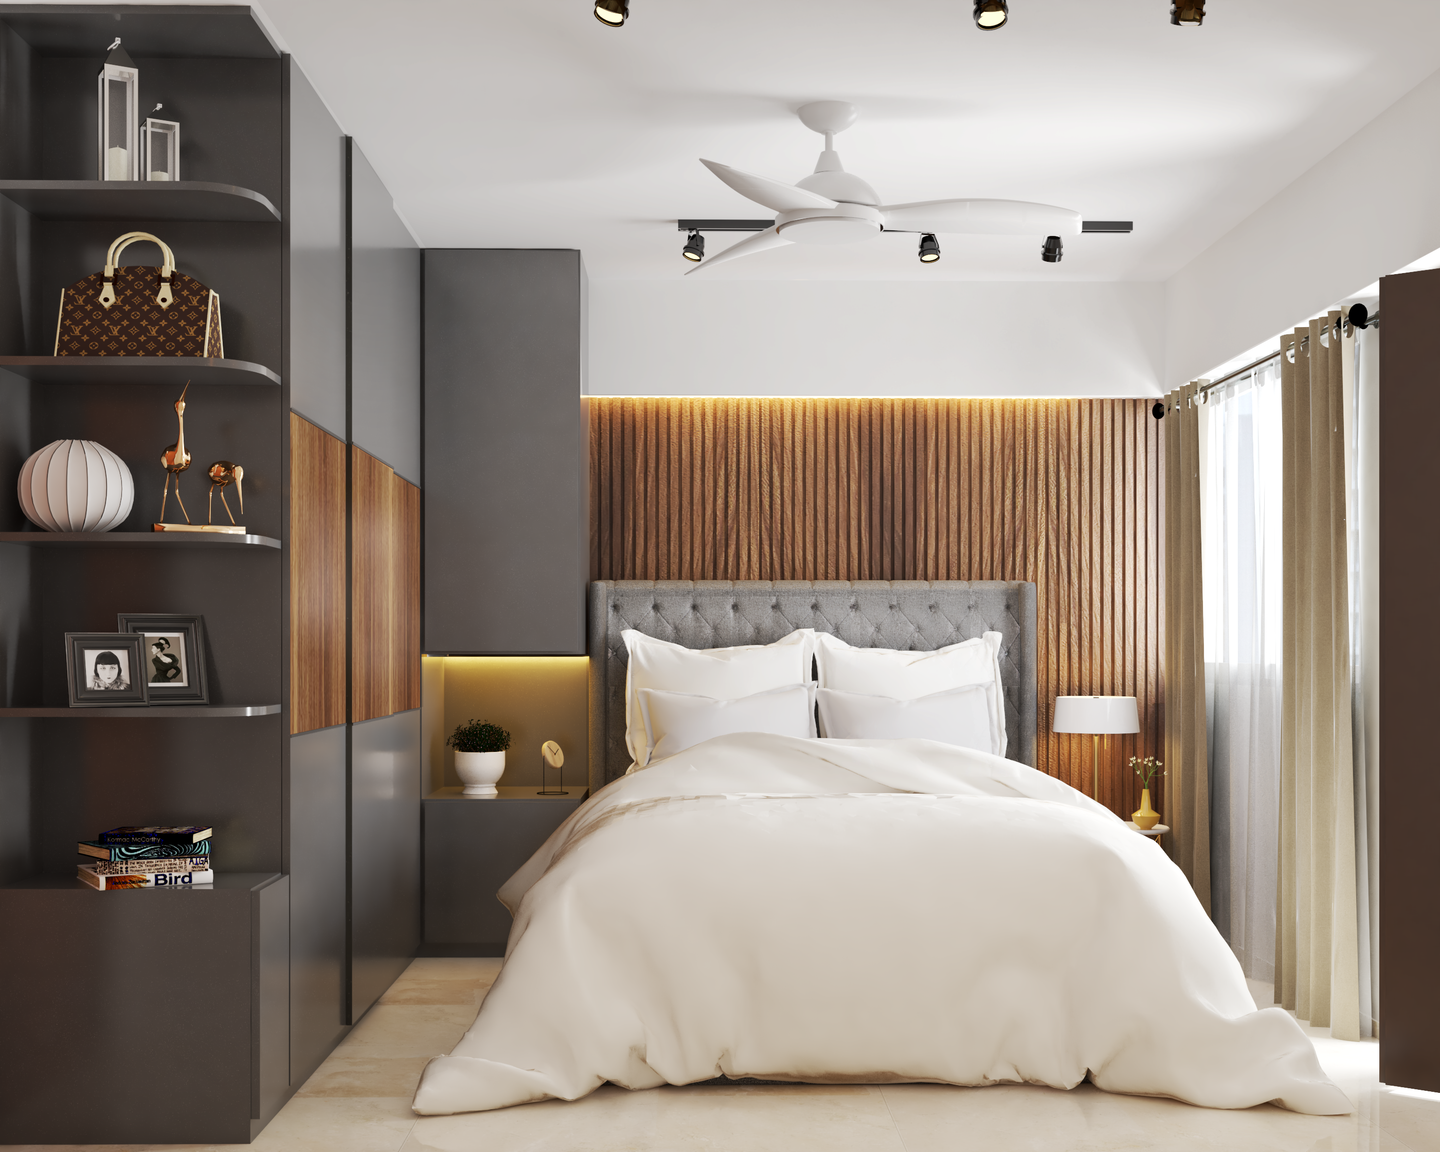 Compact Bedroom with Wood and Grey Tones - Livspace